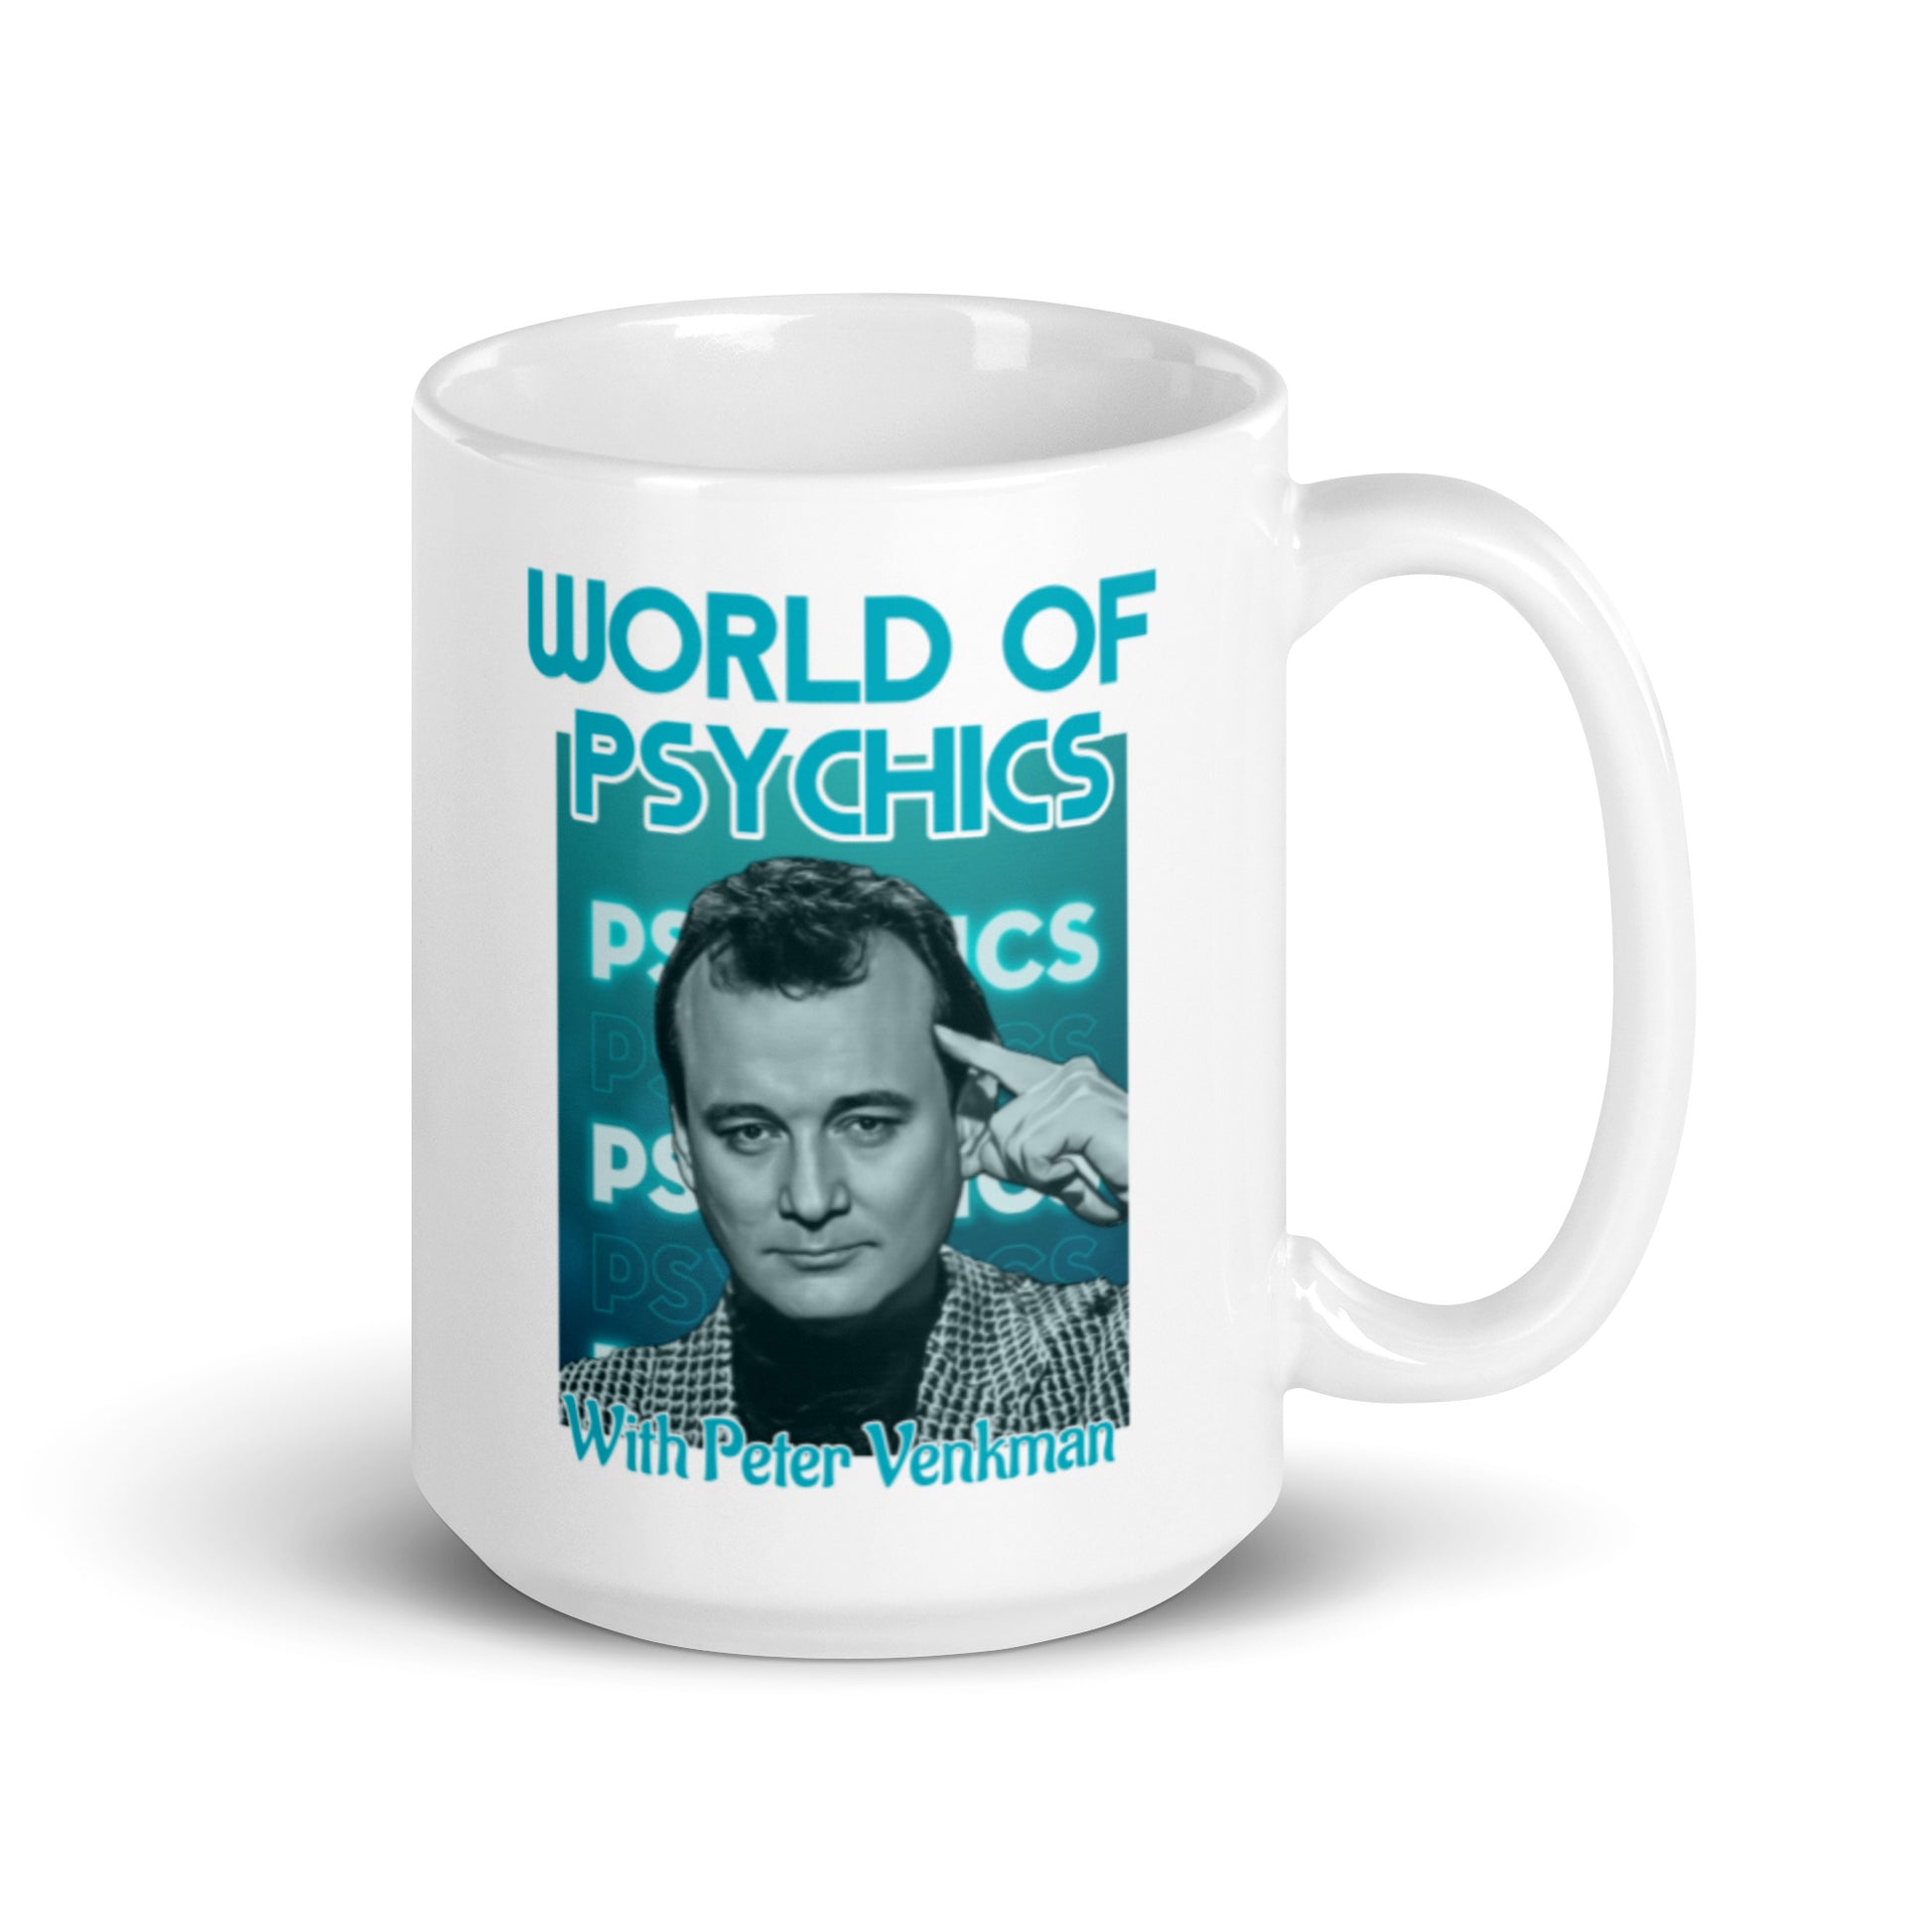 Ghostbusters style world of Psychics white glossy mug, Mug Ghostbusters style world of Psychics, Ghostbusters mug, Ghostbusters movie - McLaren Tee Hub 